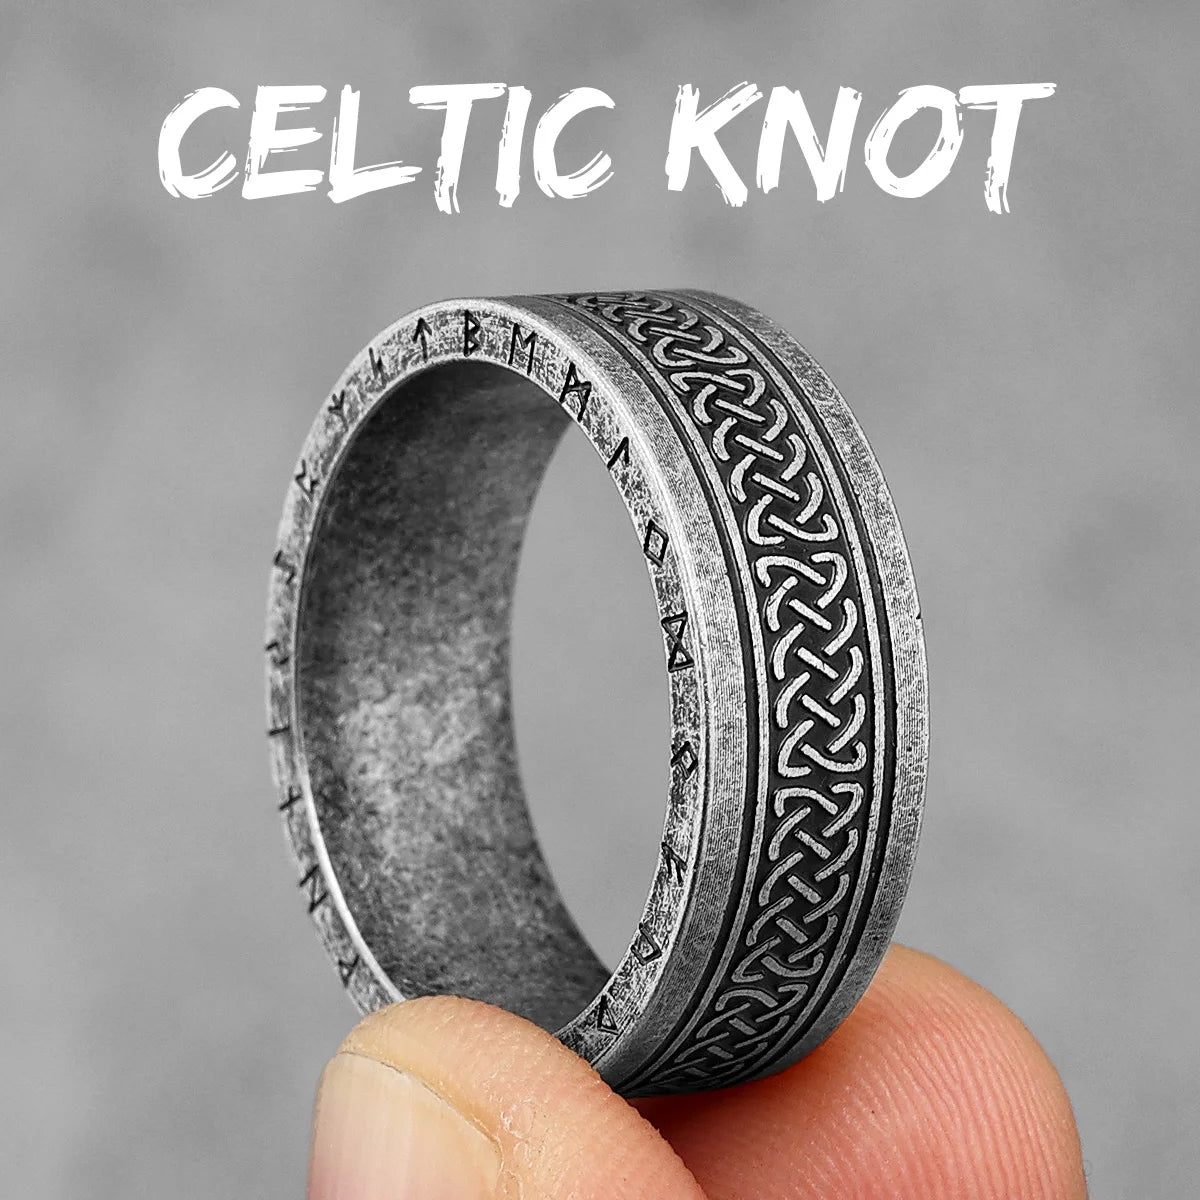 Vintage Edition - Viking Runes Celtic Knot Rings - Mythical Pieces 11 / R1011-Vintage Silver-1